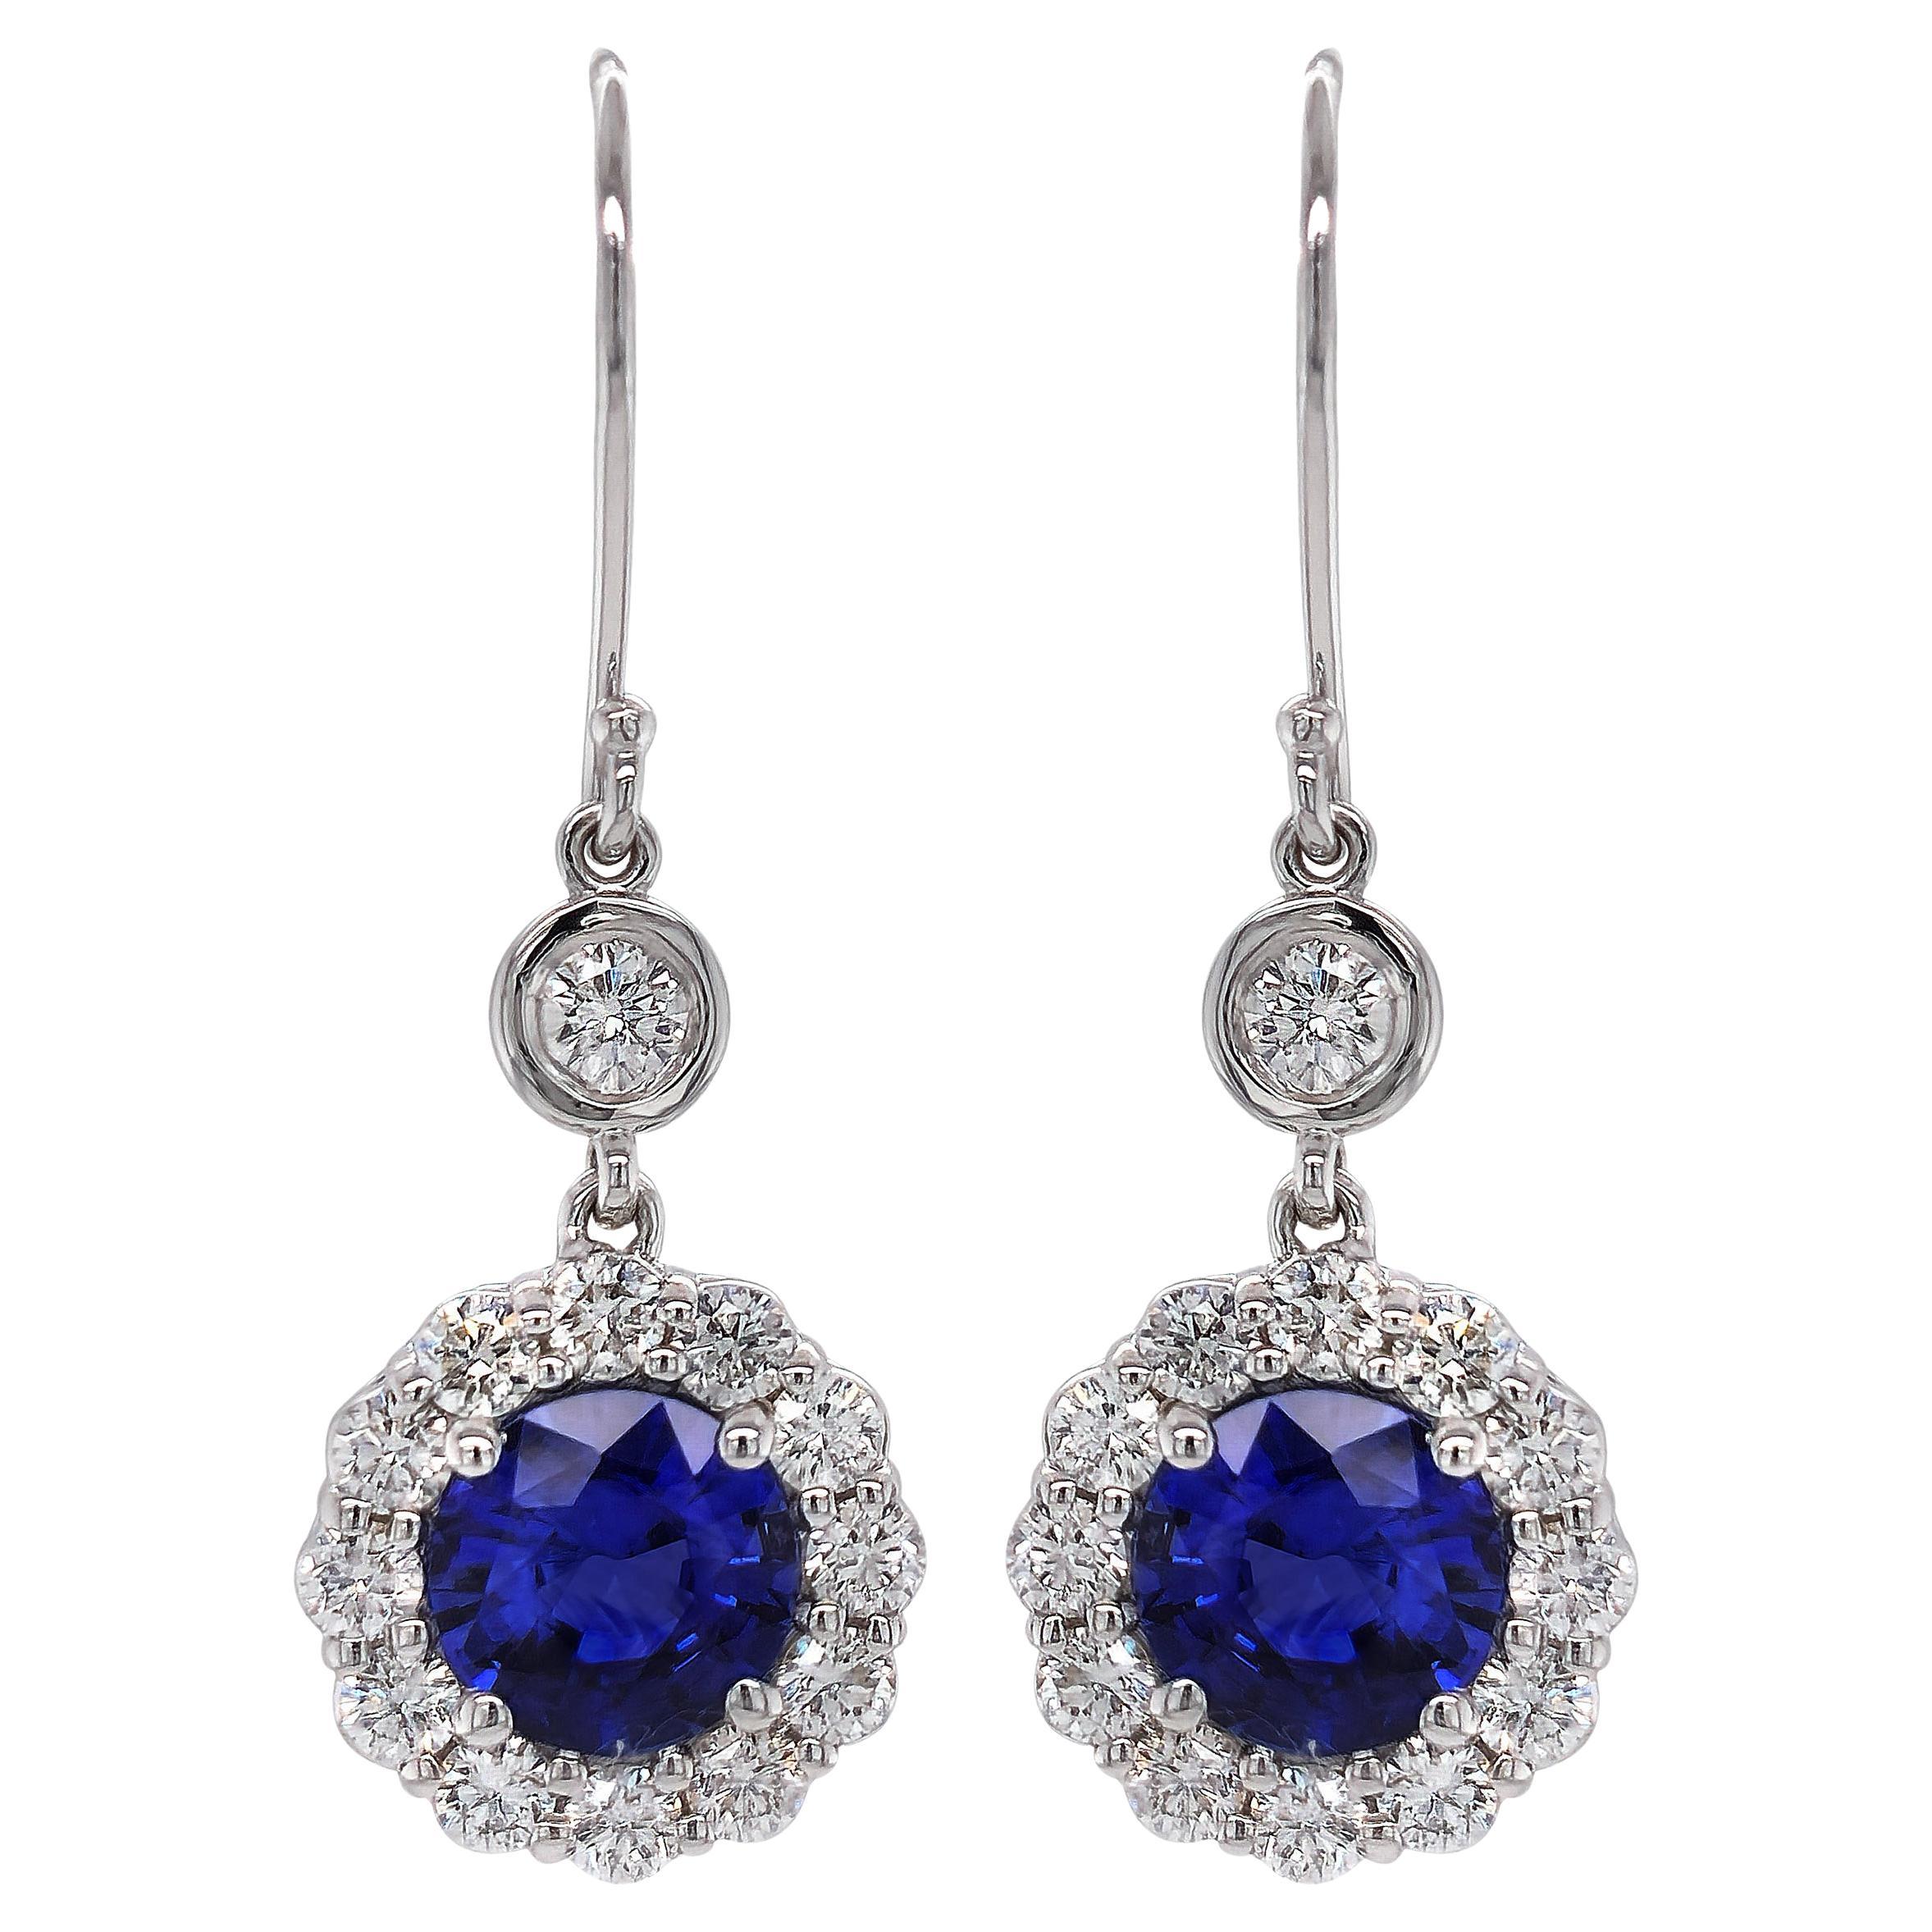 Natural Blue Sapphires 2.24 Carats set in 18K White Gold Earrings with Diamonds For Sale